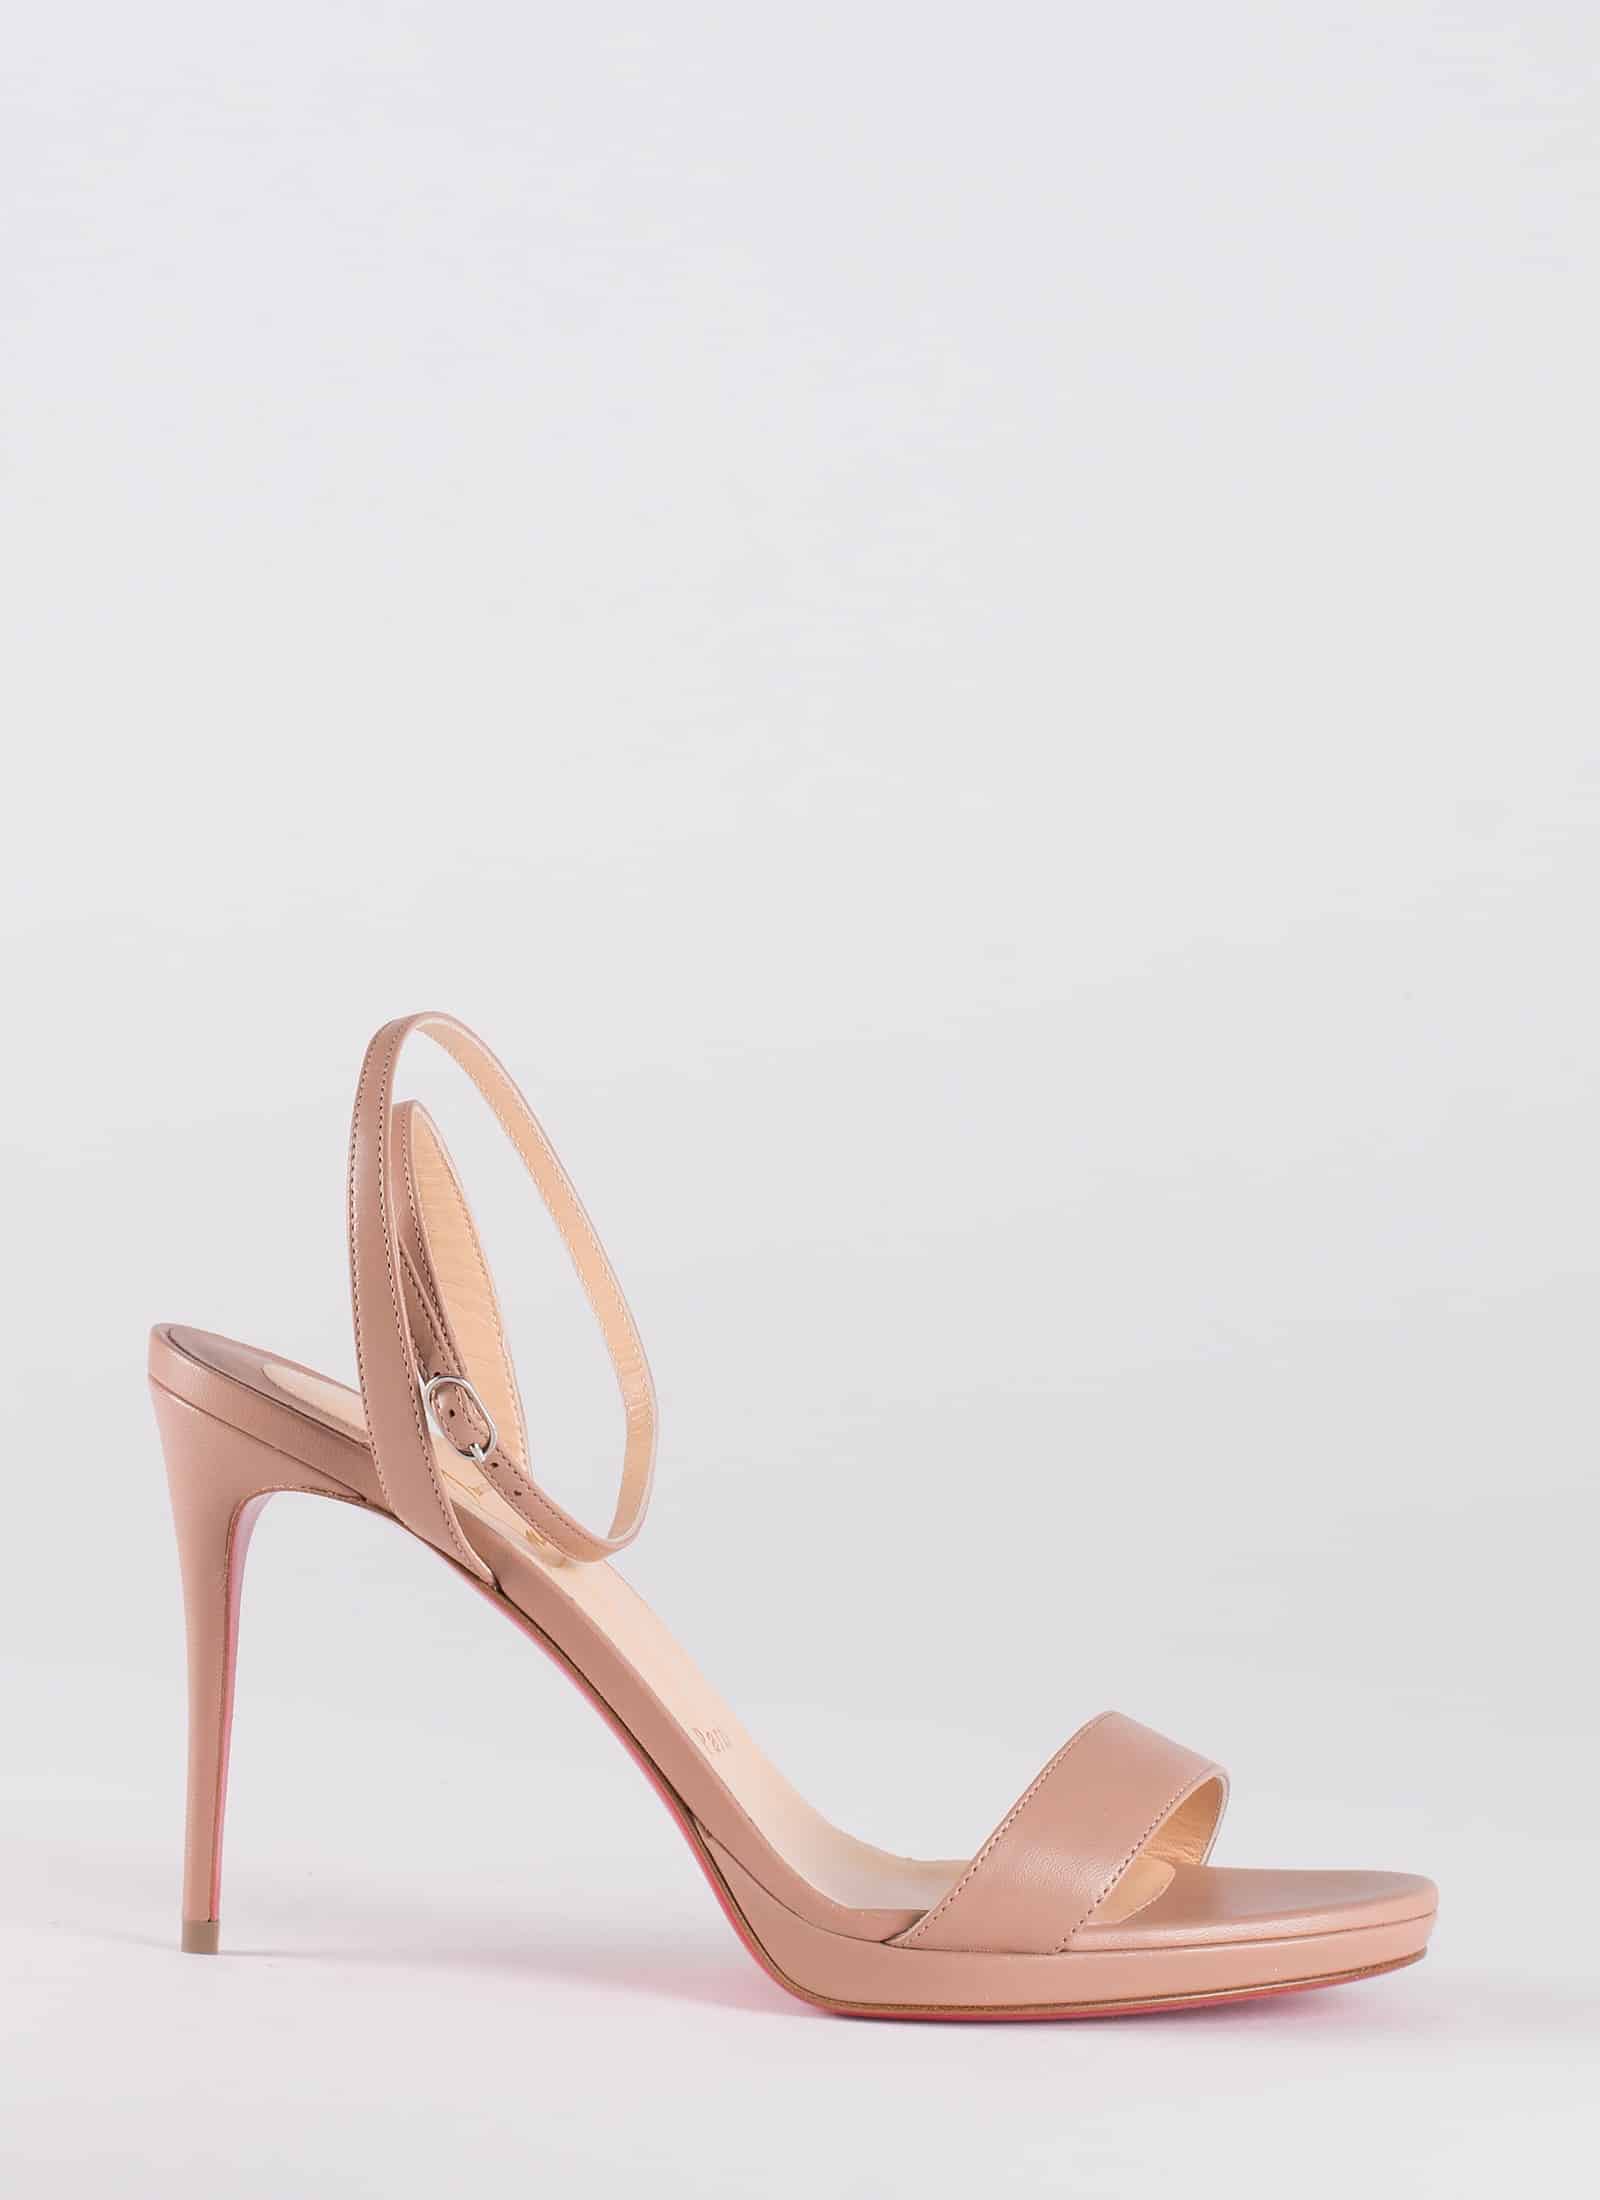 LEATHER SANDALS - CHRISTIAN LOUBOUTIN